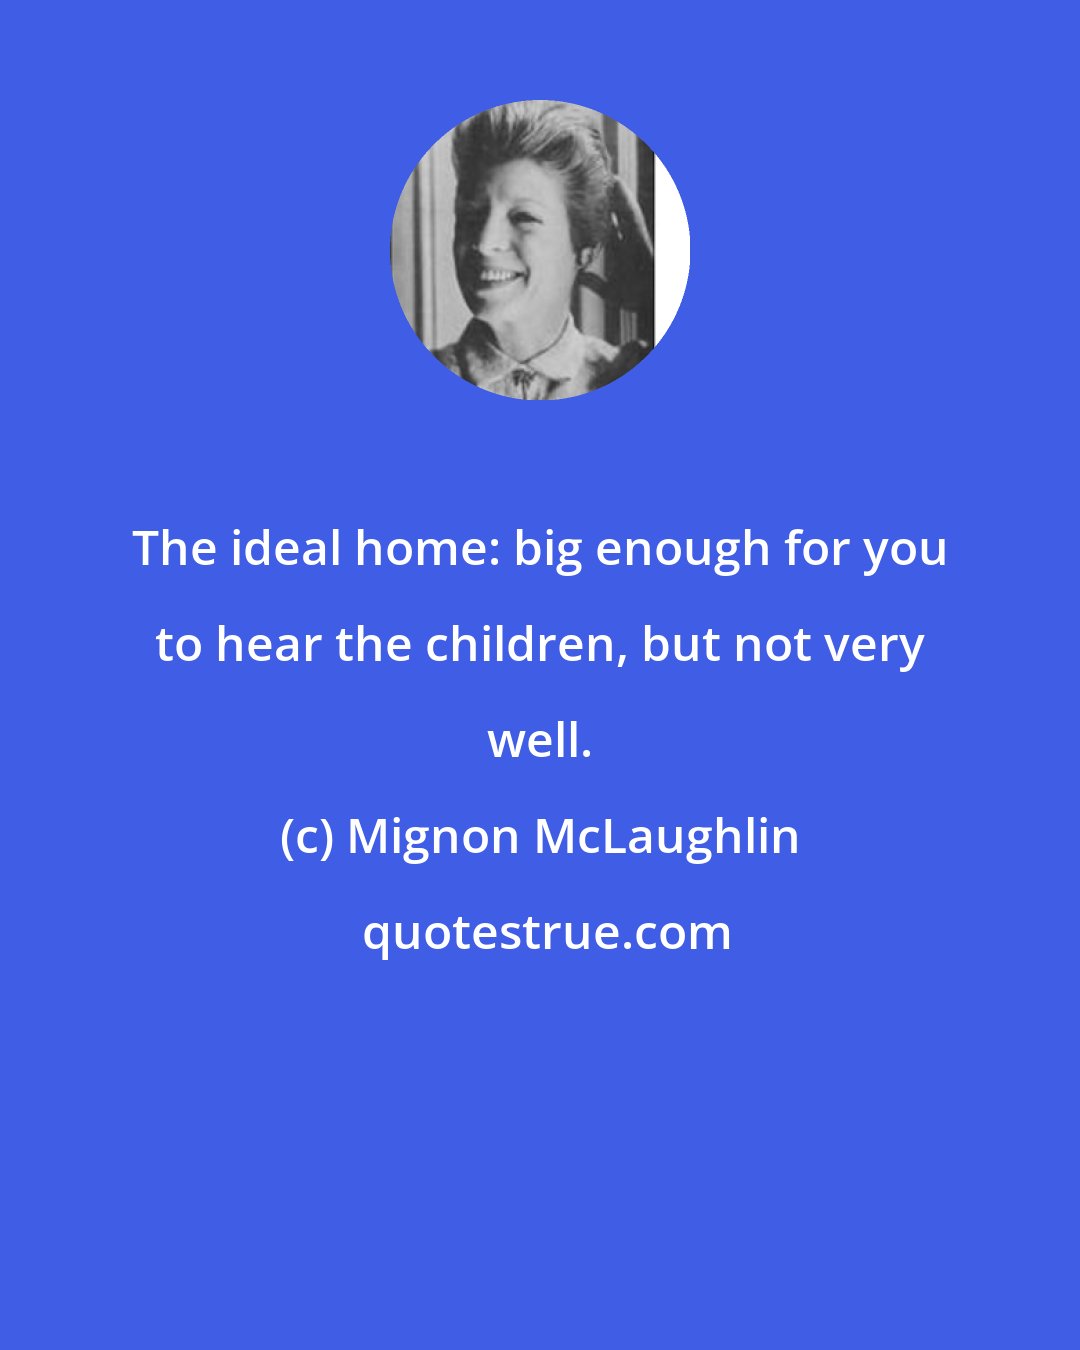 Mignon McLaughlin: The ideal home: big enough for you to hear the children, but not very well.